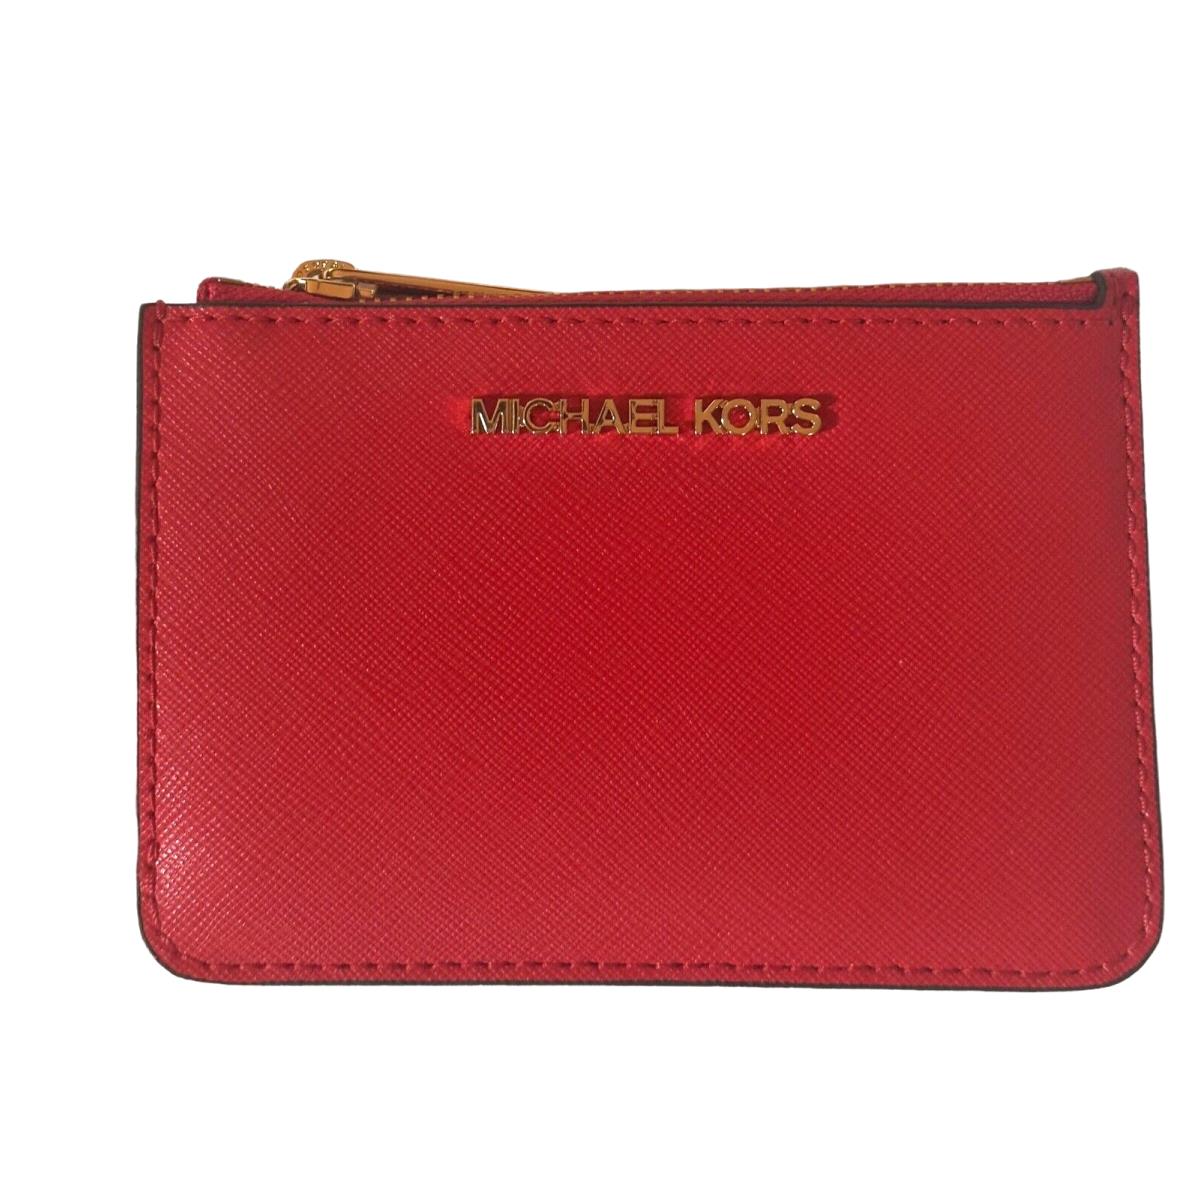 Michael Kors Jet Set Sm. Travel Top Zip Coin Pouch with Id-leather Dark Sangria